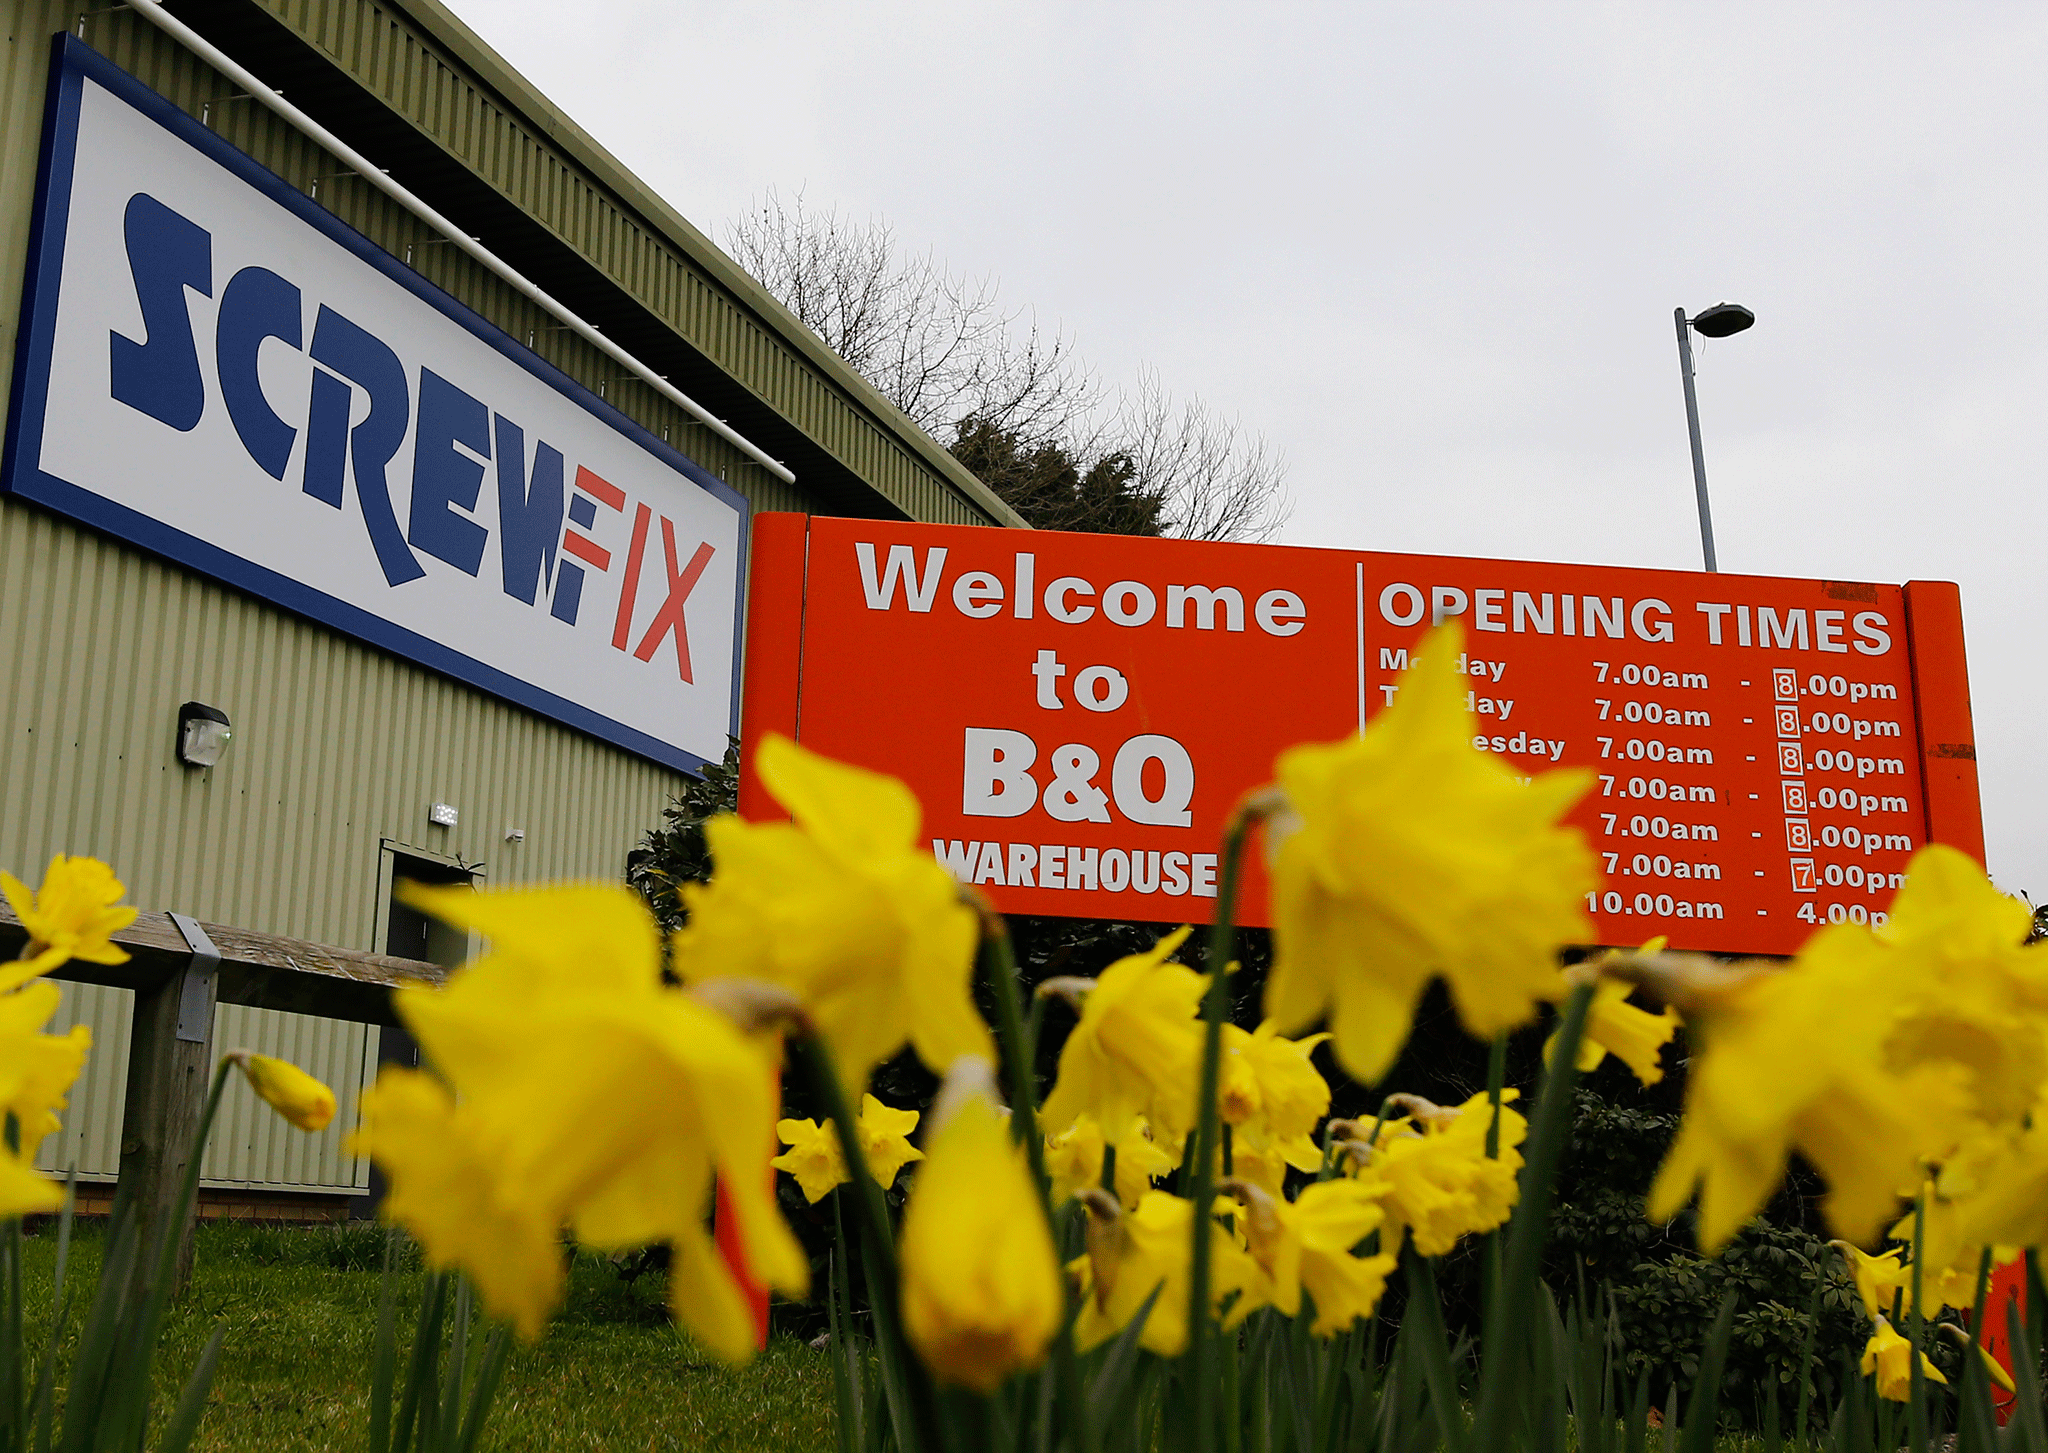 Kingfisher sales rise to £3bn thanks to strong performance at Screwfix